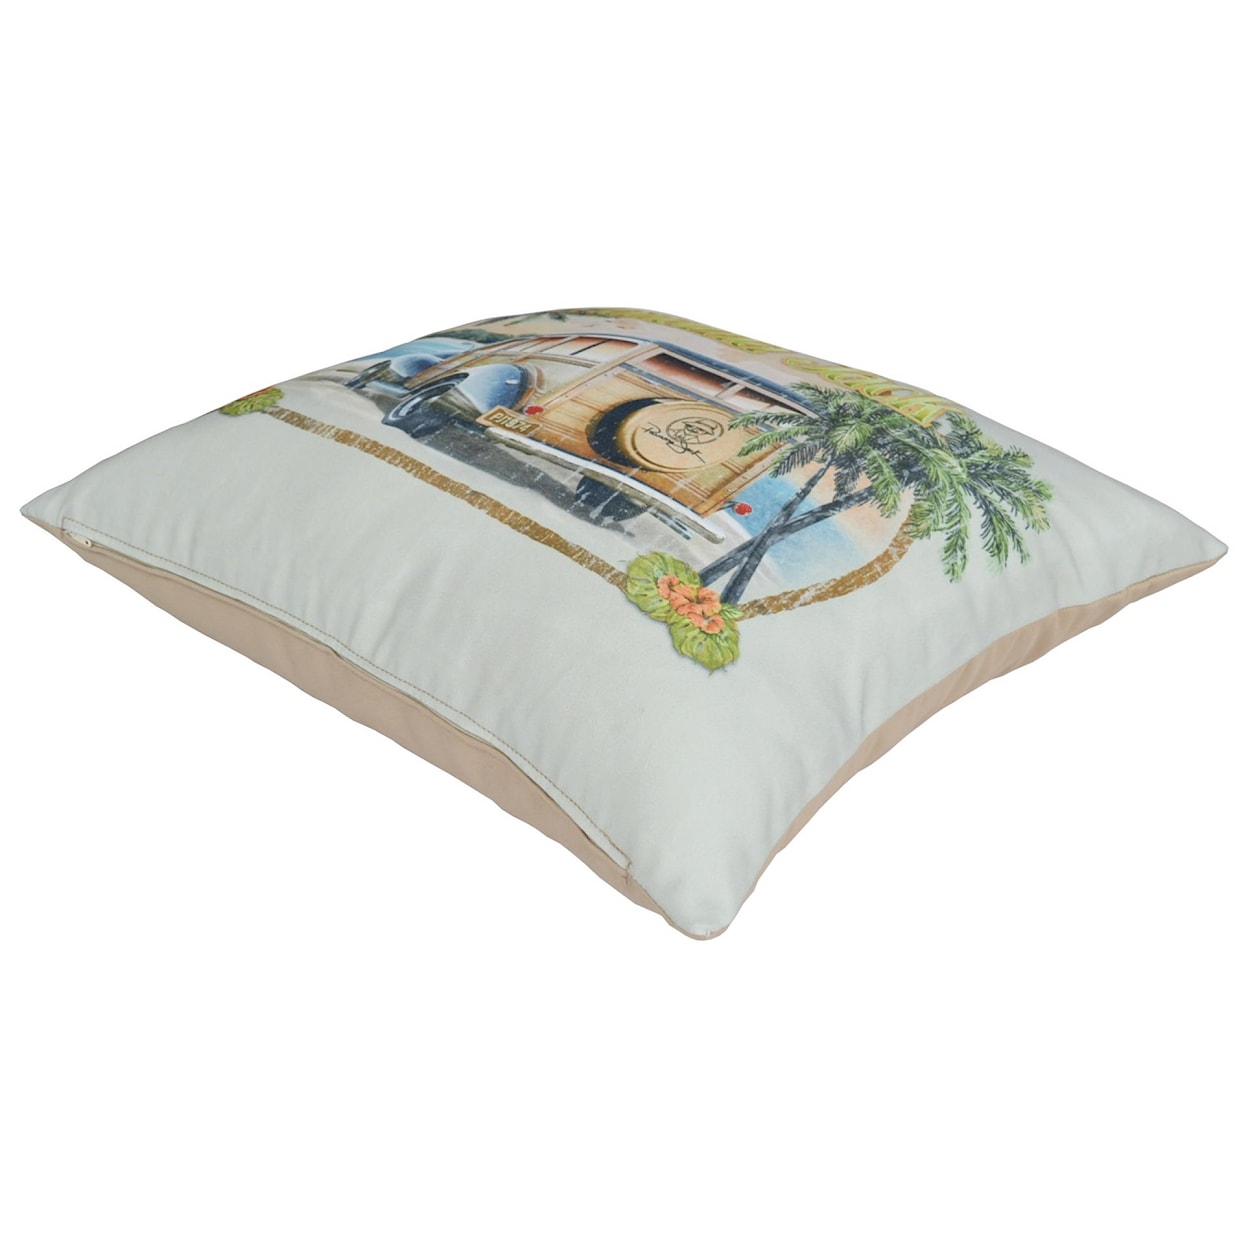 Pelican Reef Panama Jack Pillows and Ottomans No Problems Throw Pillow